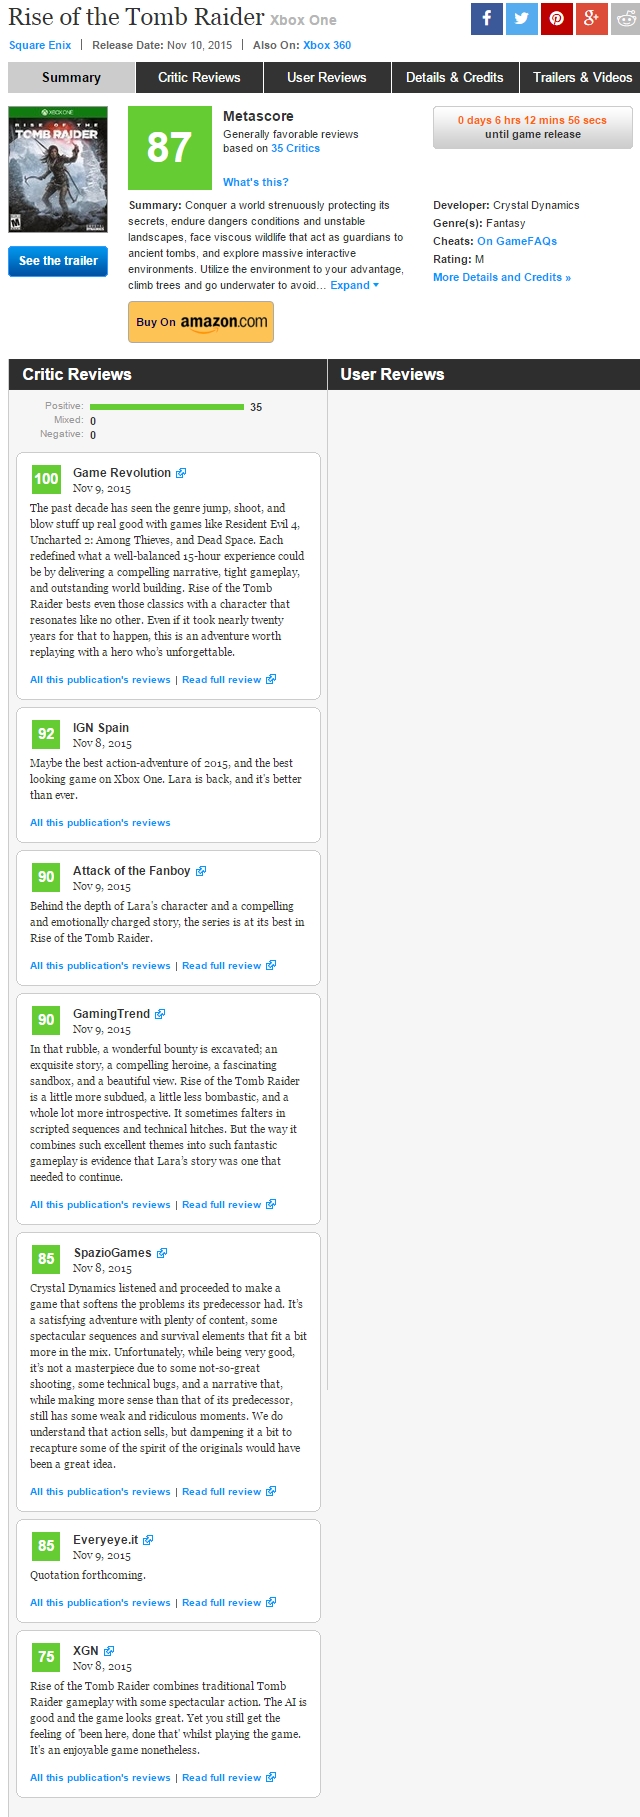 'Rise of the Tomb Raider for Xbox One Reviews - Metacritic' - www_metacritic_com_game_xbox-one_rise-of-the-tomb-raider - 261.jpg